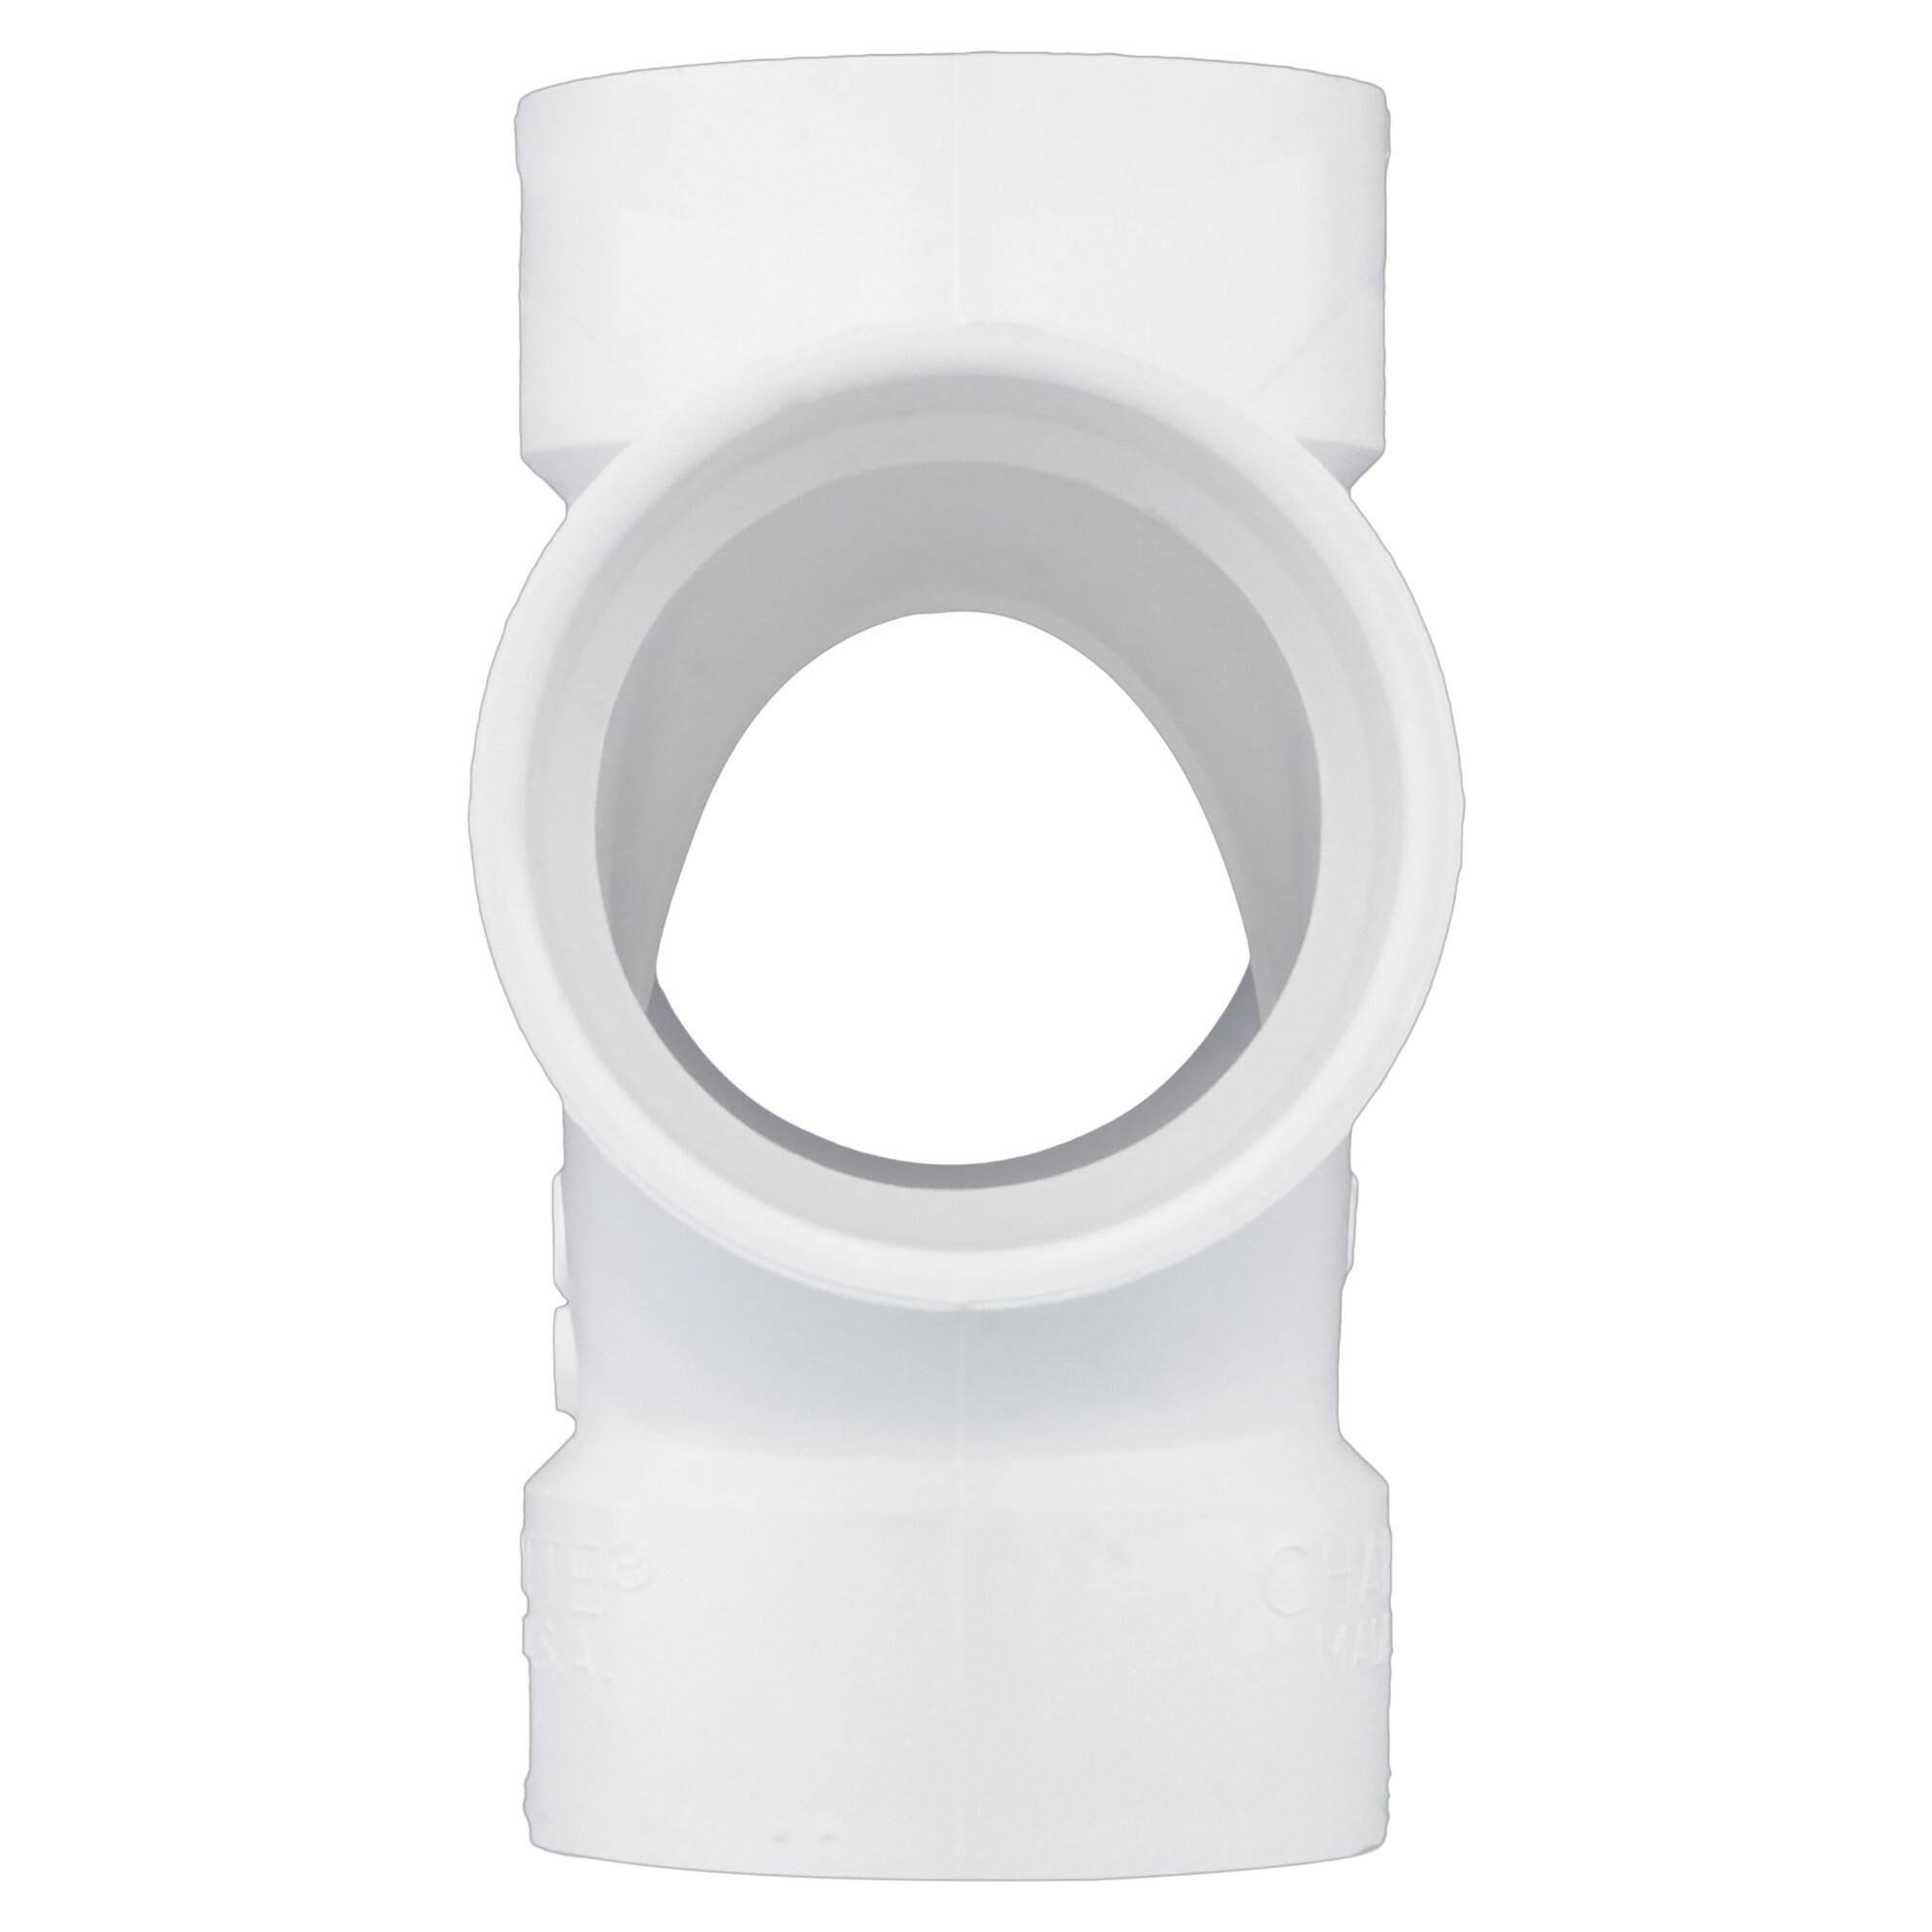 Double sanitary tee Pipe & Fittings at